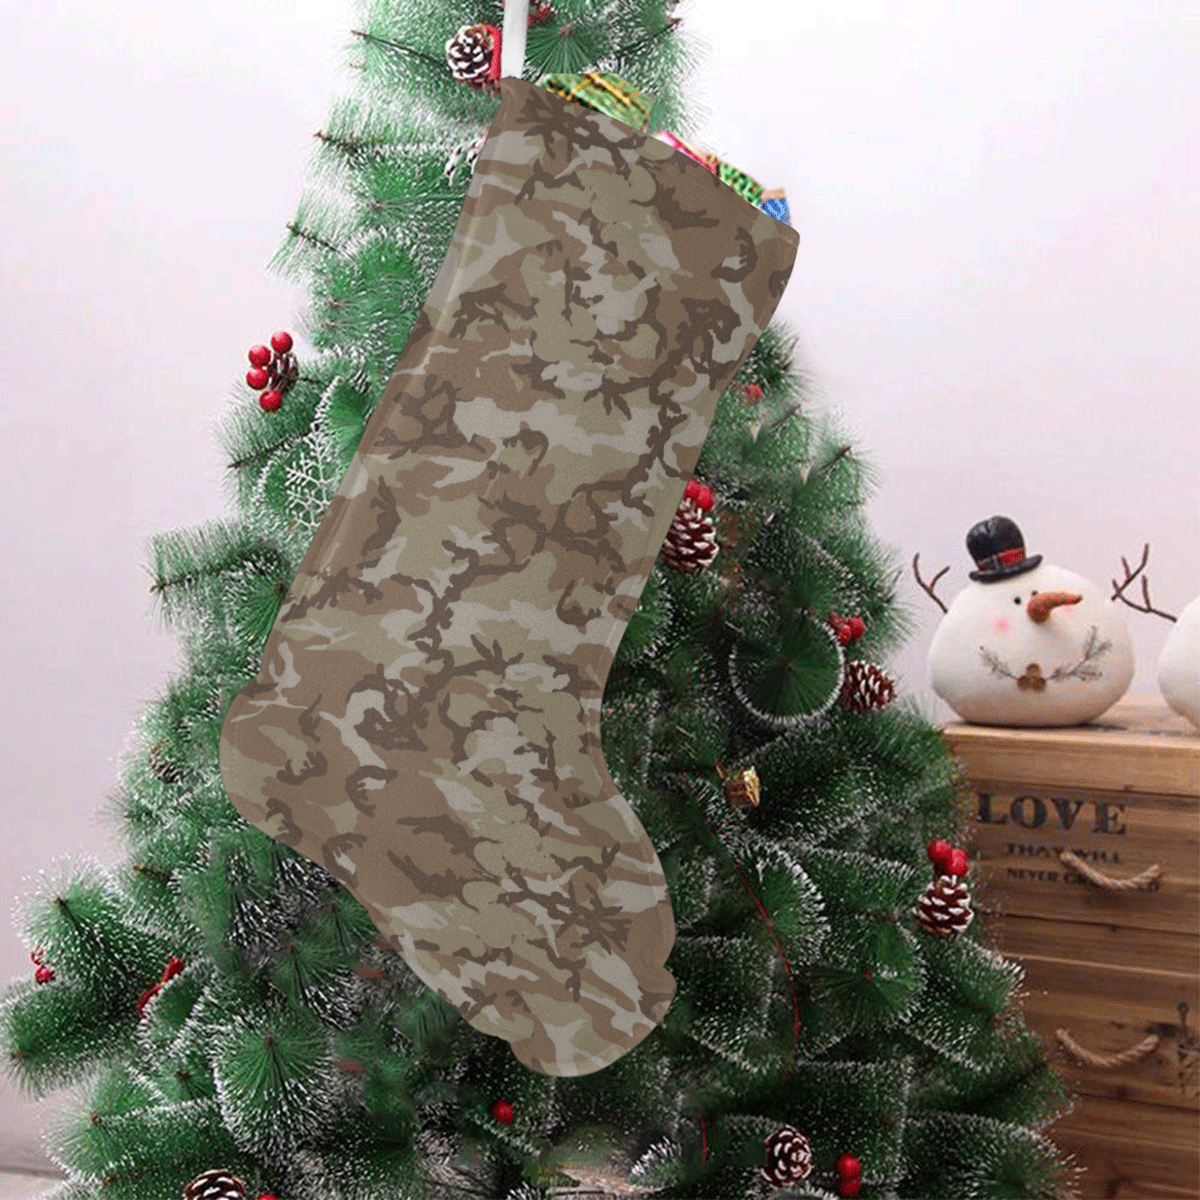 Woodland Desert Brown Camouflage Christmas Stocking (Without Folded Top)